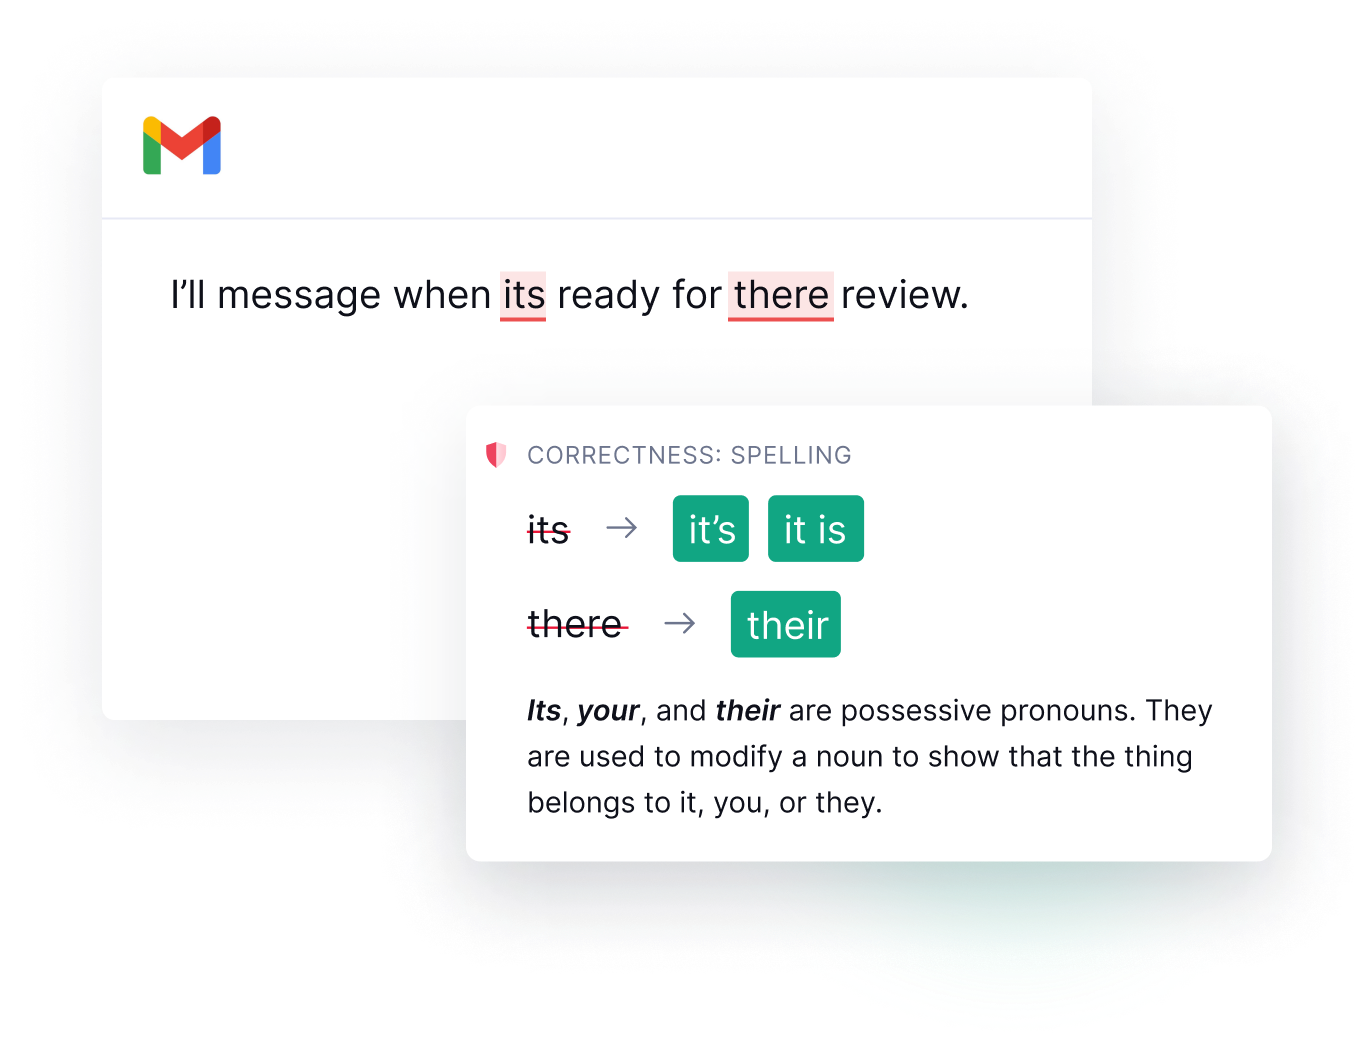 Example of the Grammarly product in an e-mail